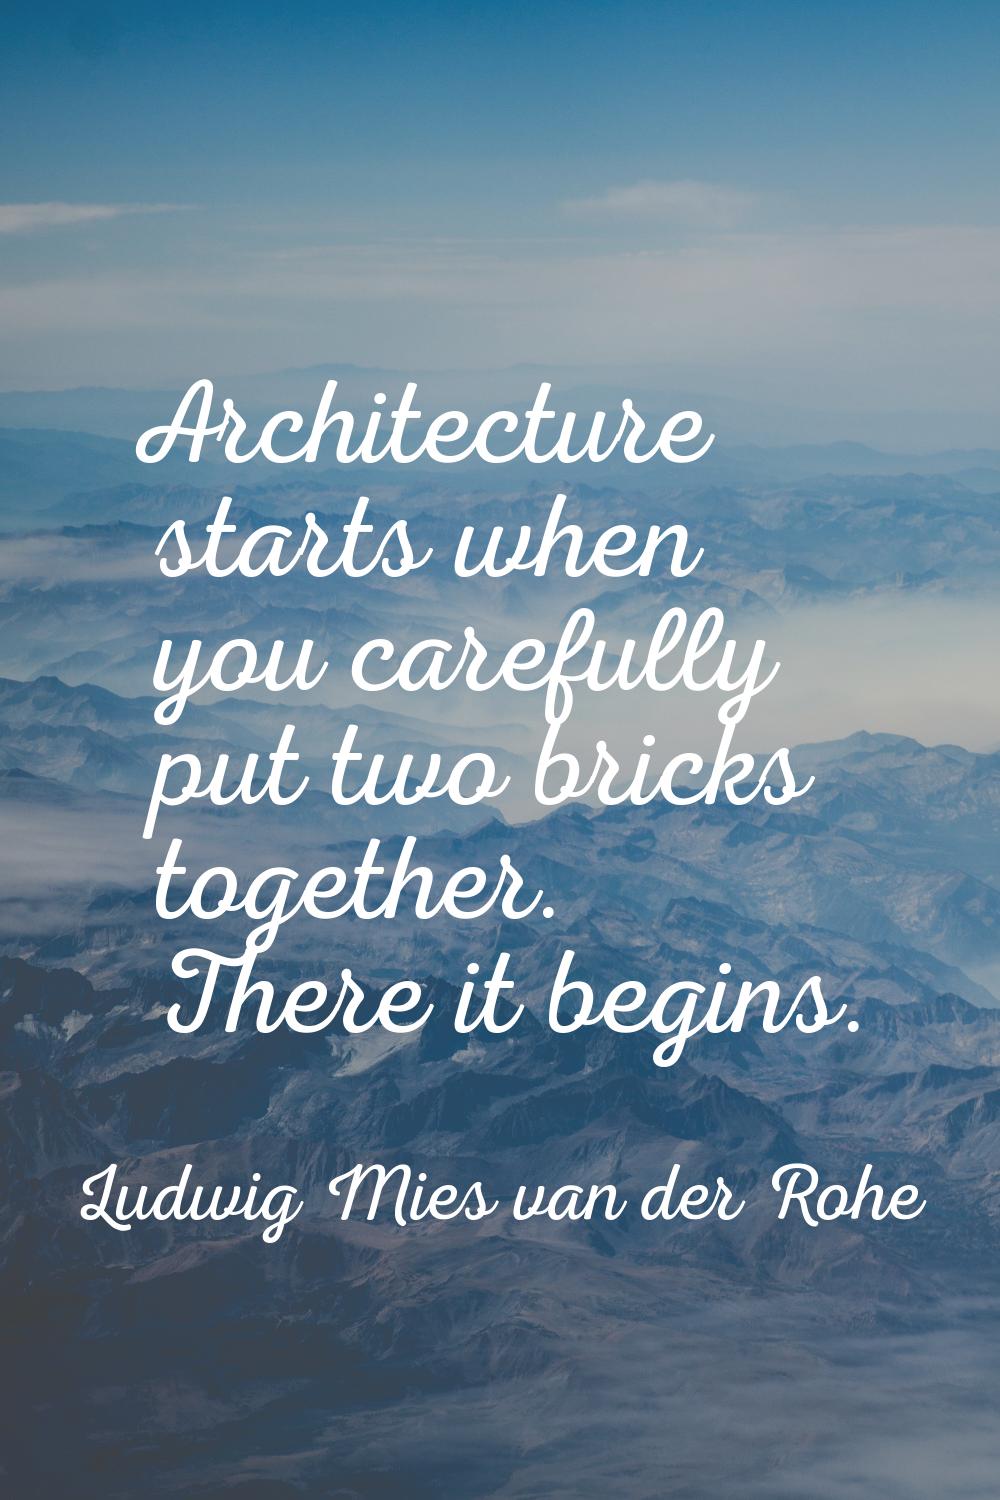 Architecture starts when you carefully put two bricks together. There it begins.